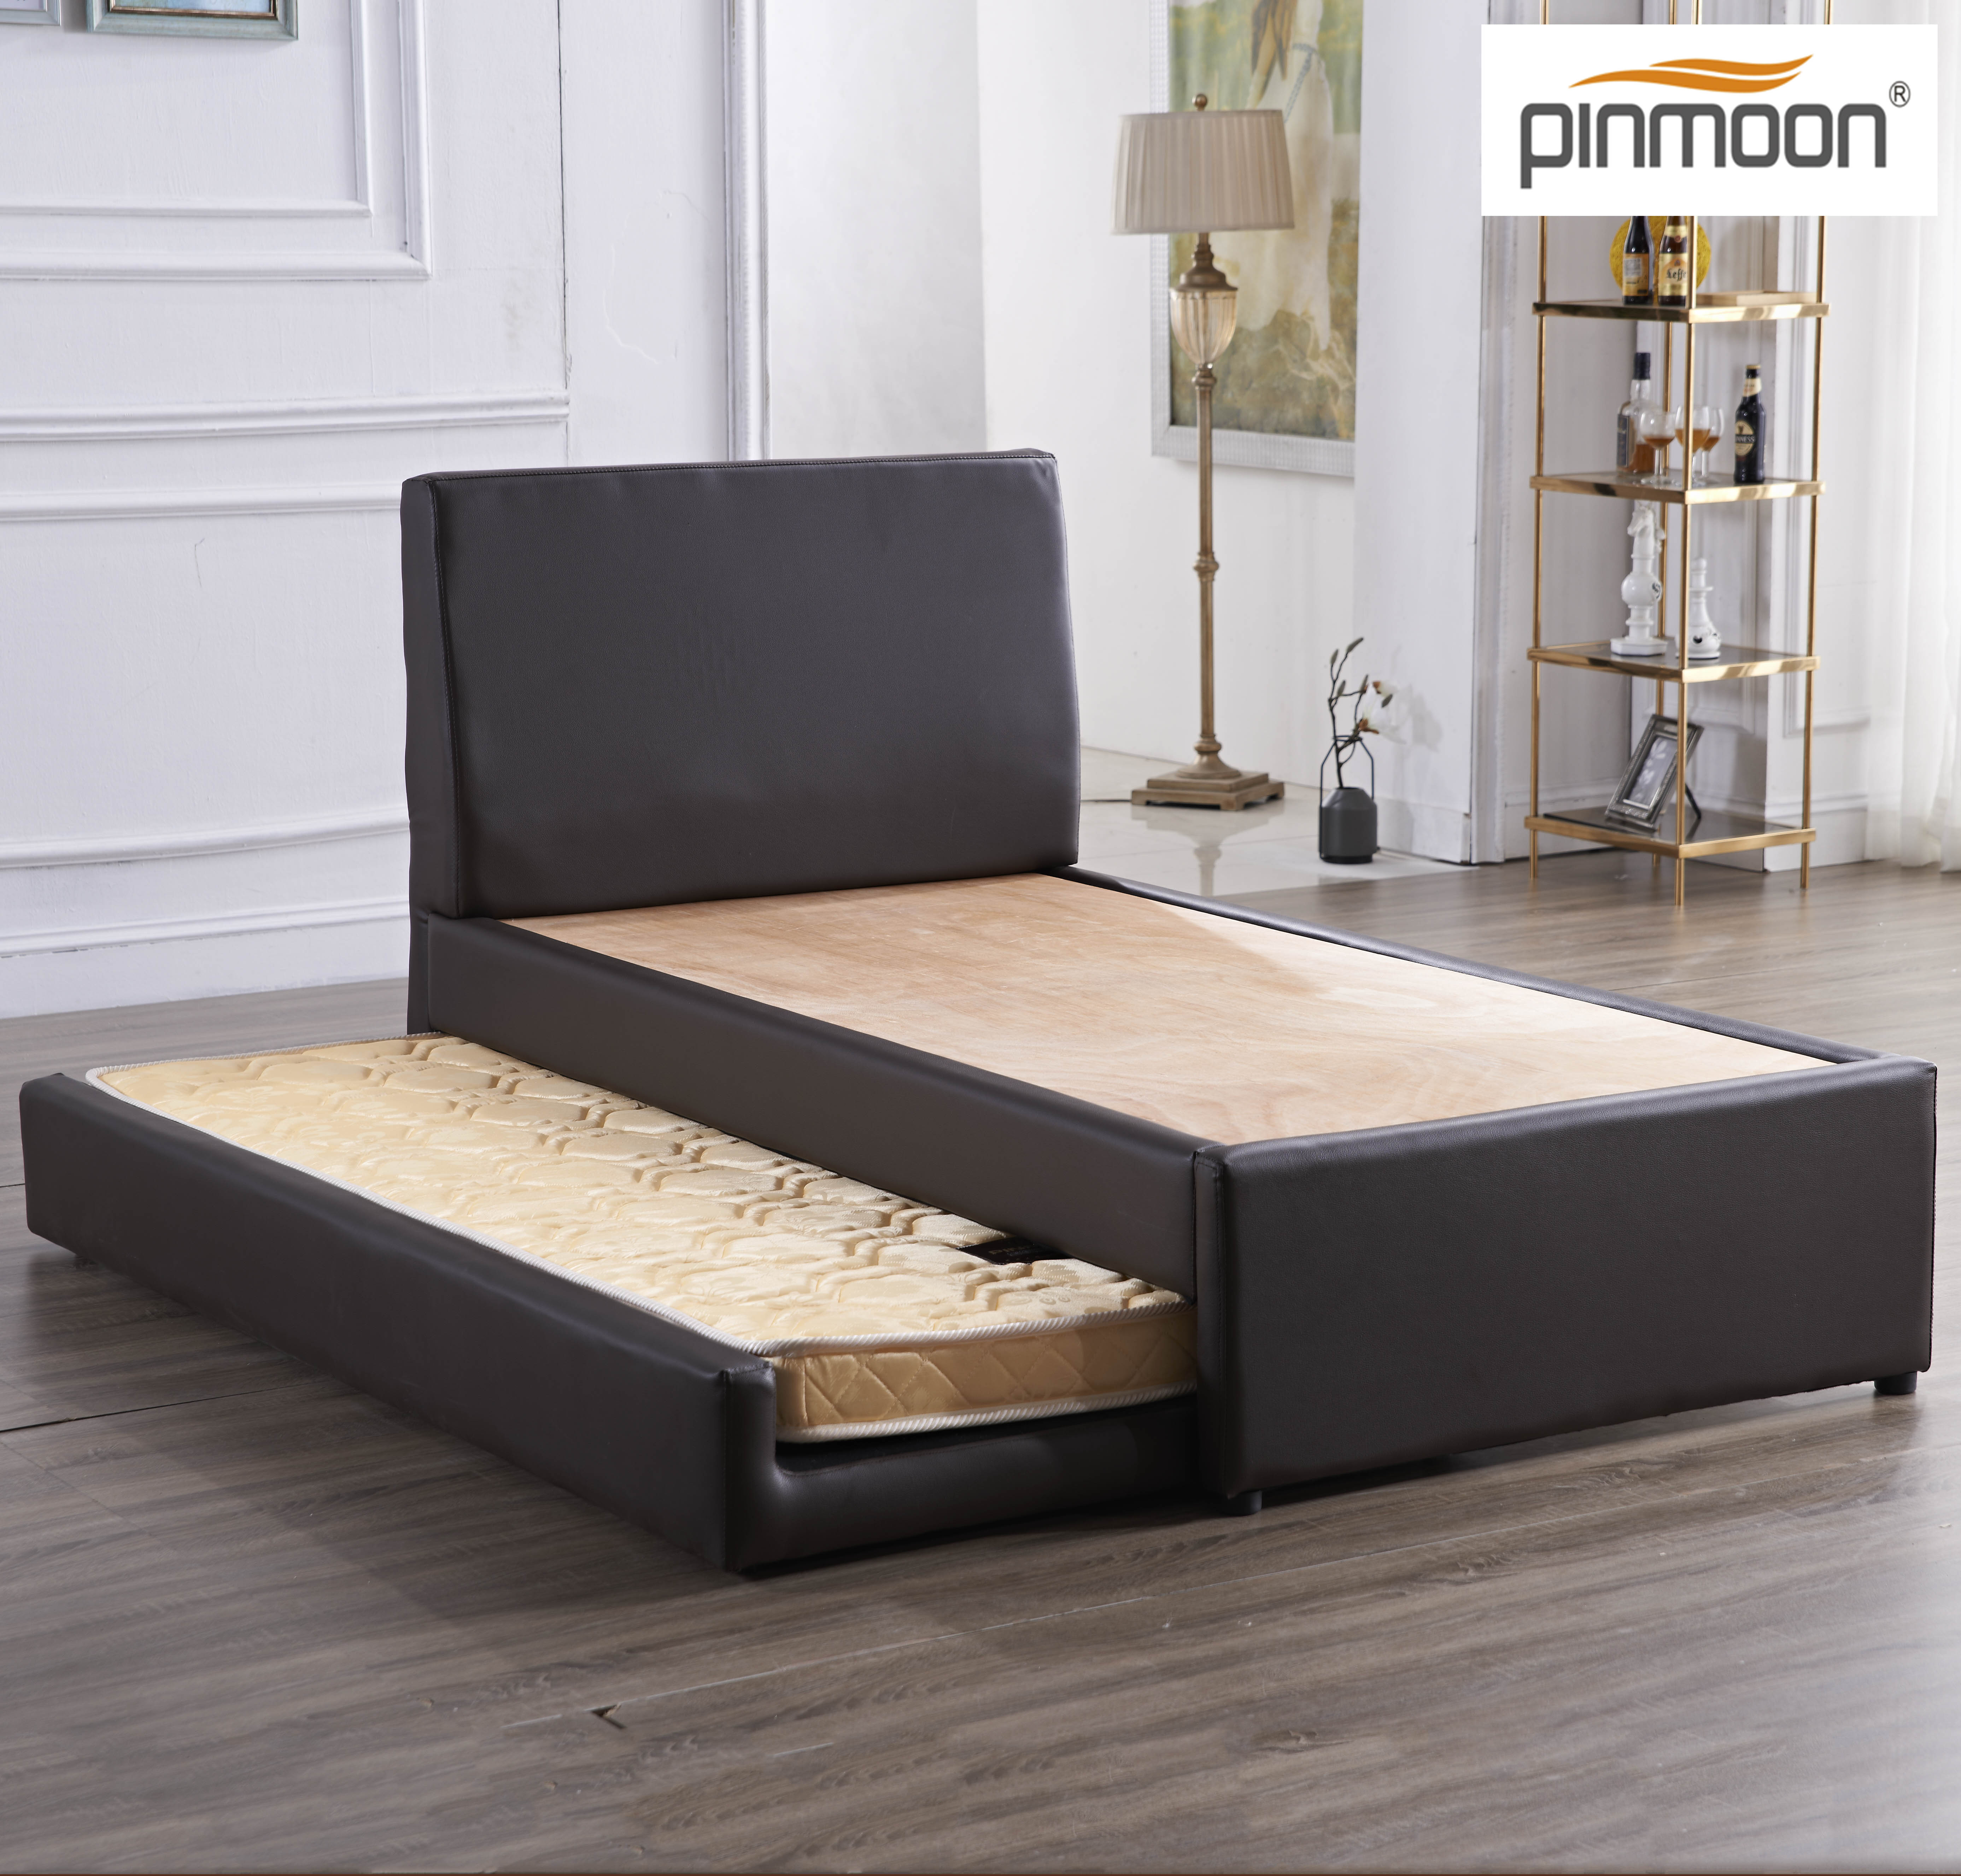 2018 best selling single bed with bed frame wooden